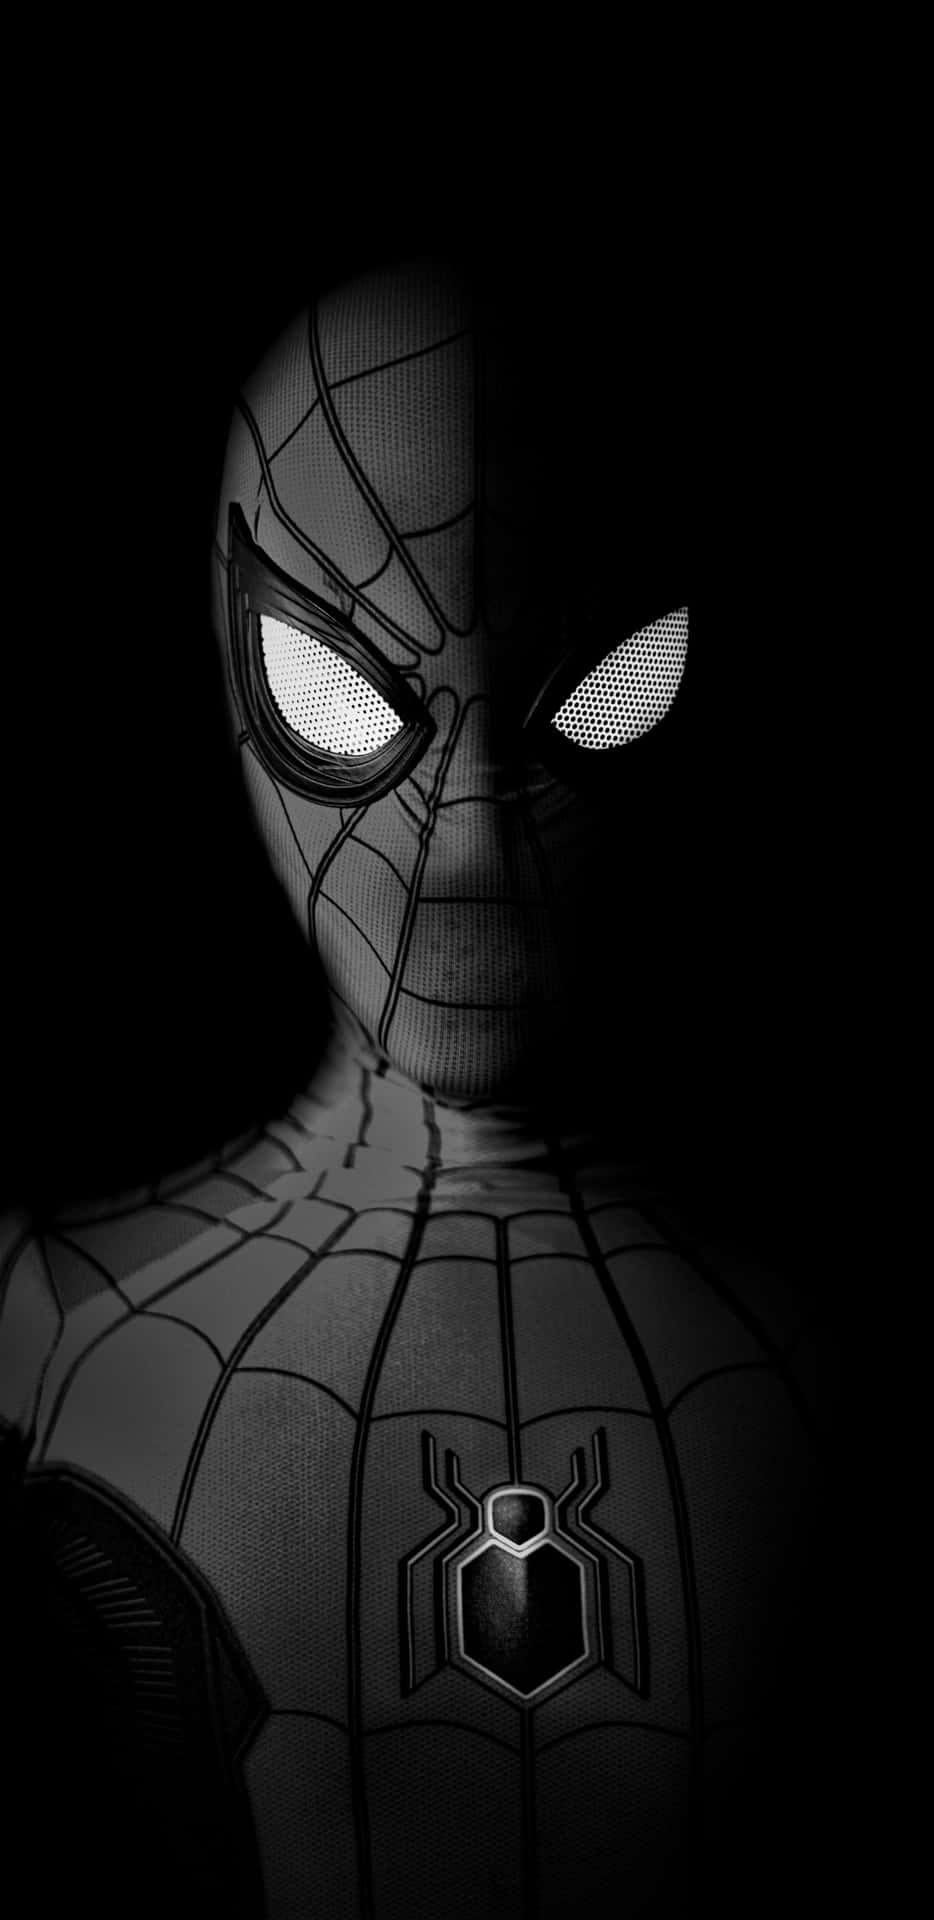 [100+] Spider Man Cool Backgrounds | Wallpapers.com